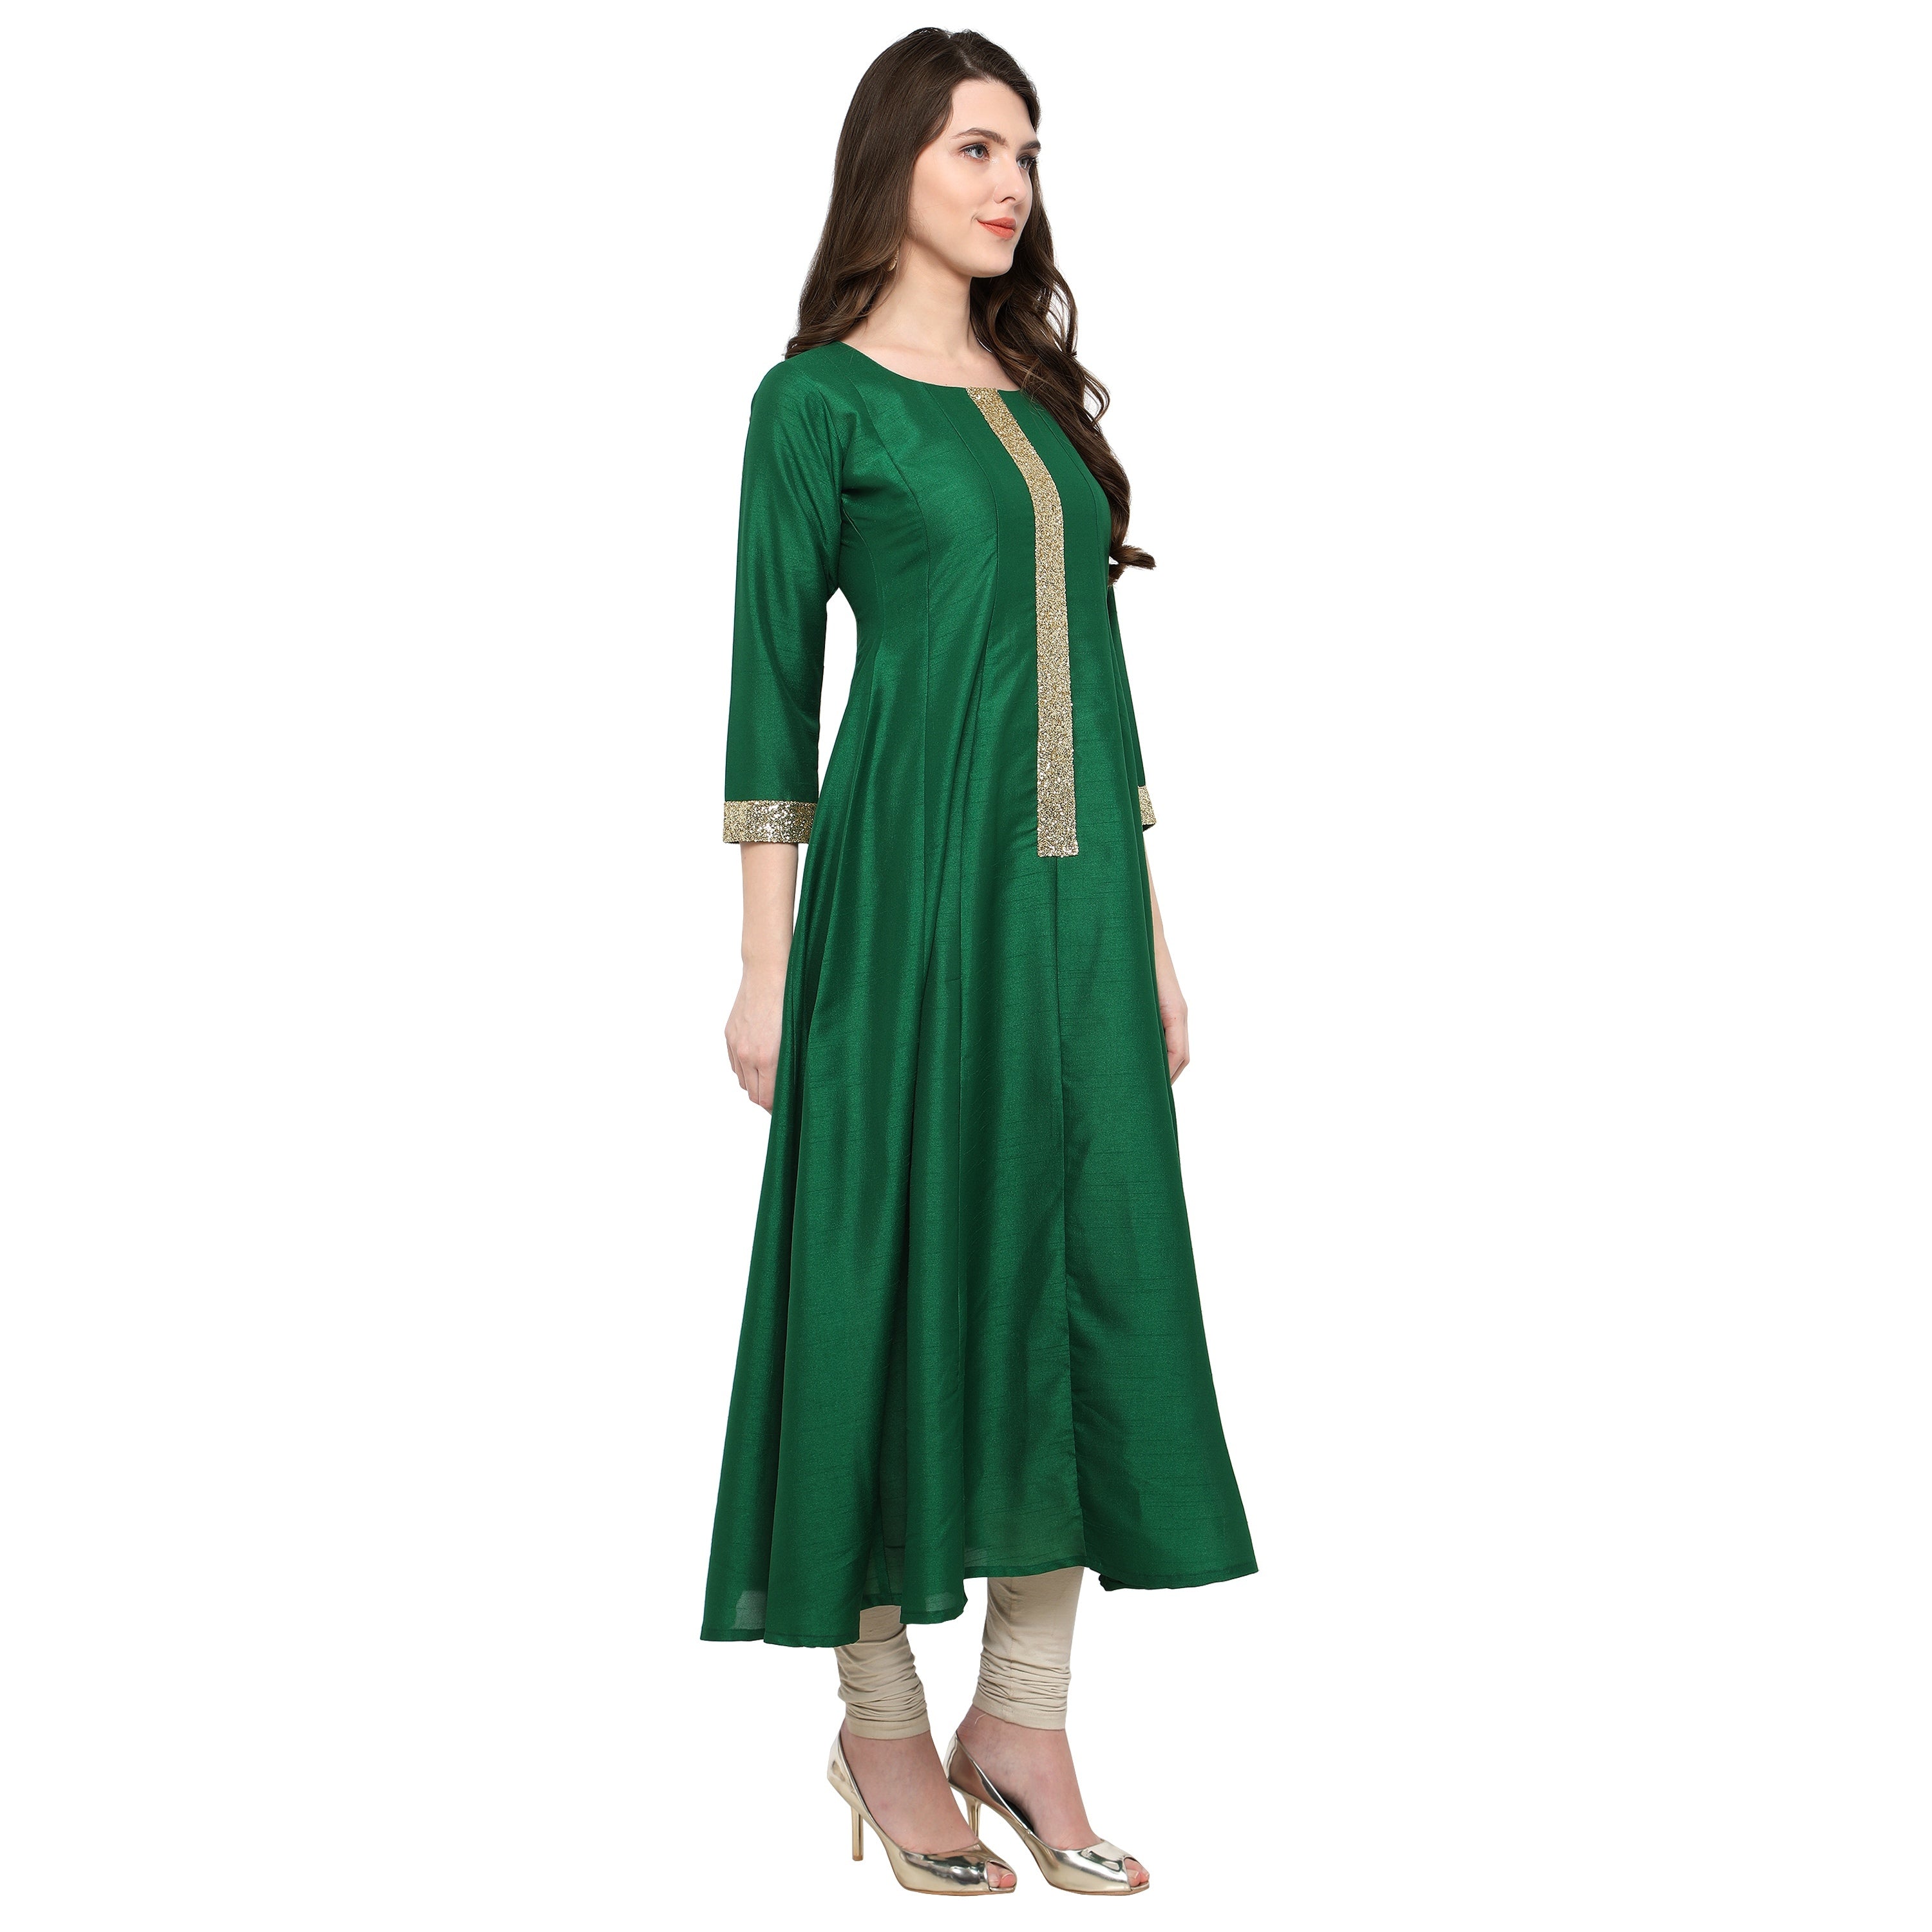 Women's Women's Green And Gold Anarkali Kurta Only For Festive And Party Wear - Ahalyaa